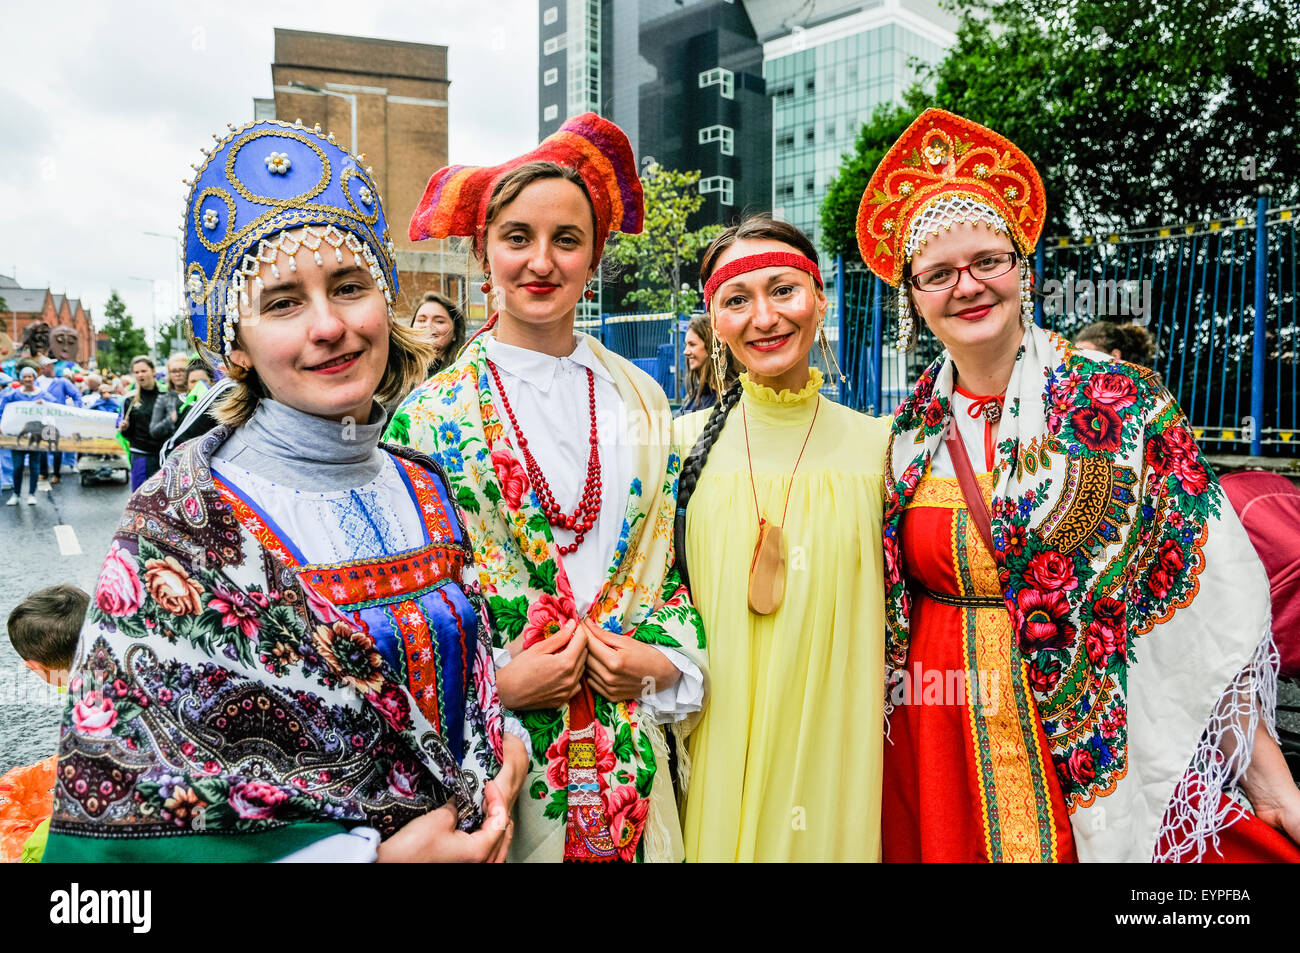 Belfast, Northern Ireland. 2 Aug 2015 - Women wear Russian traditional colourful costumes during the Feile an Phobail parade Credit:  Stephen Barnes/Alamy Live News Stock Photo